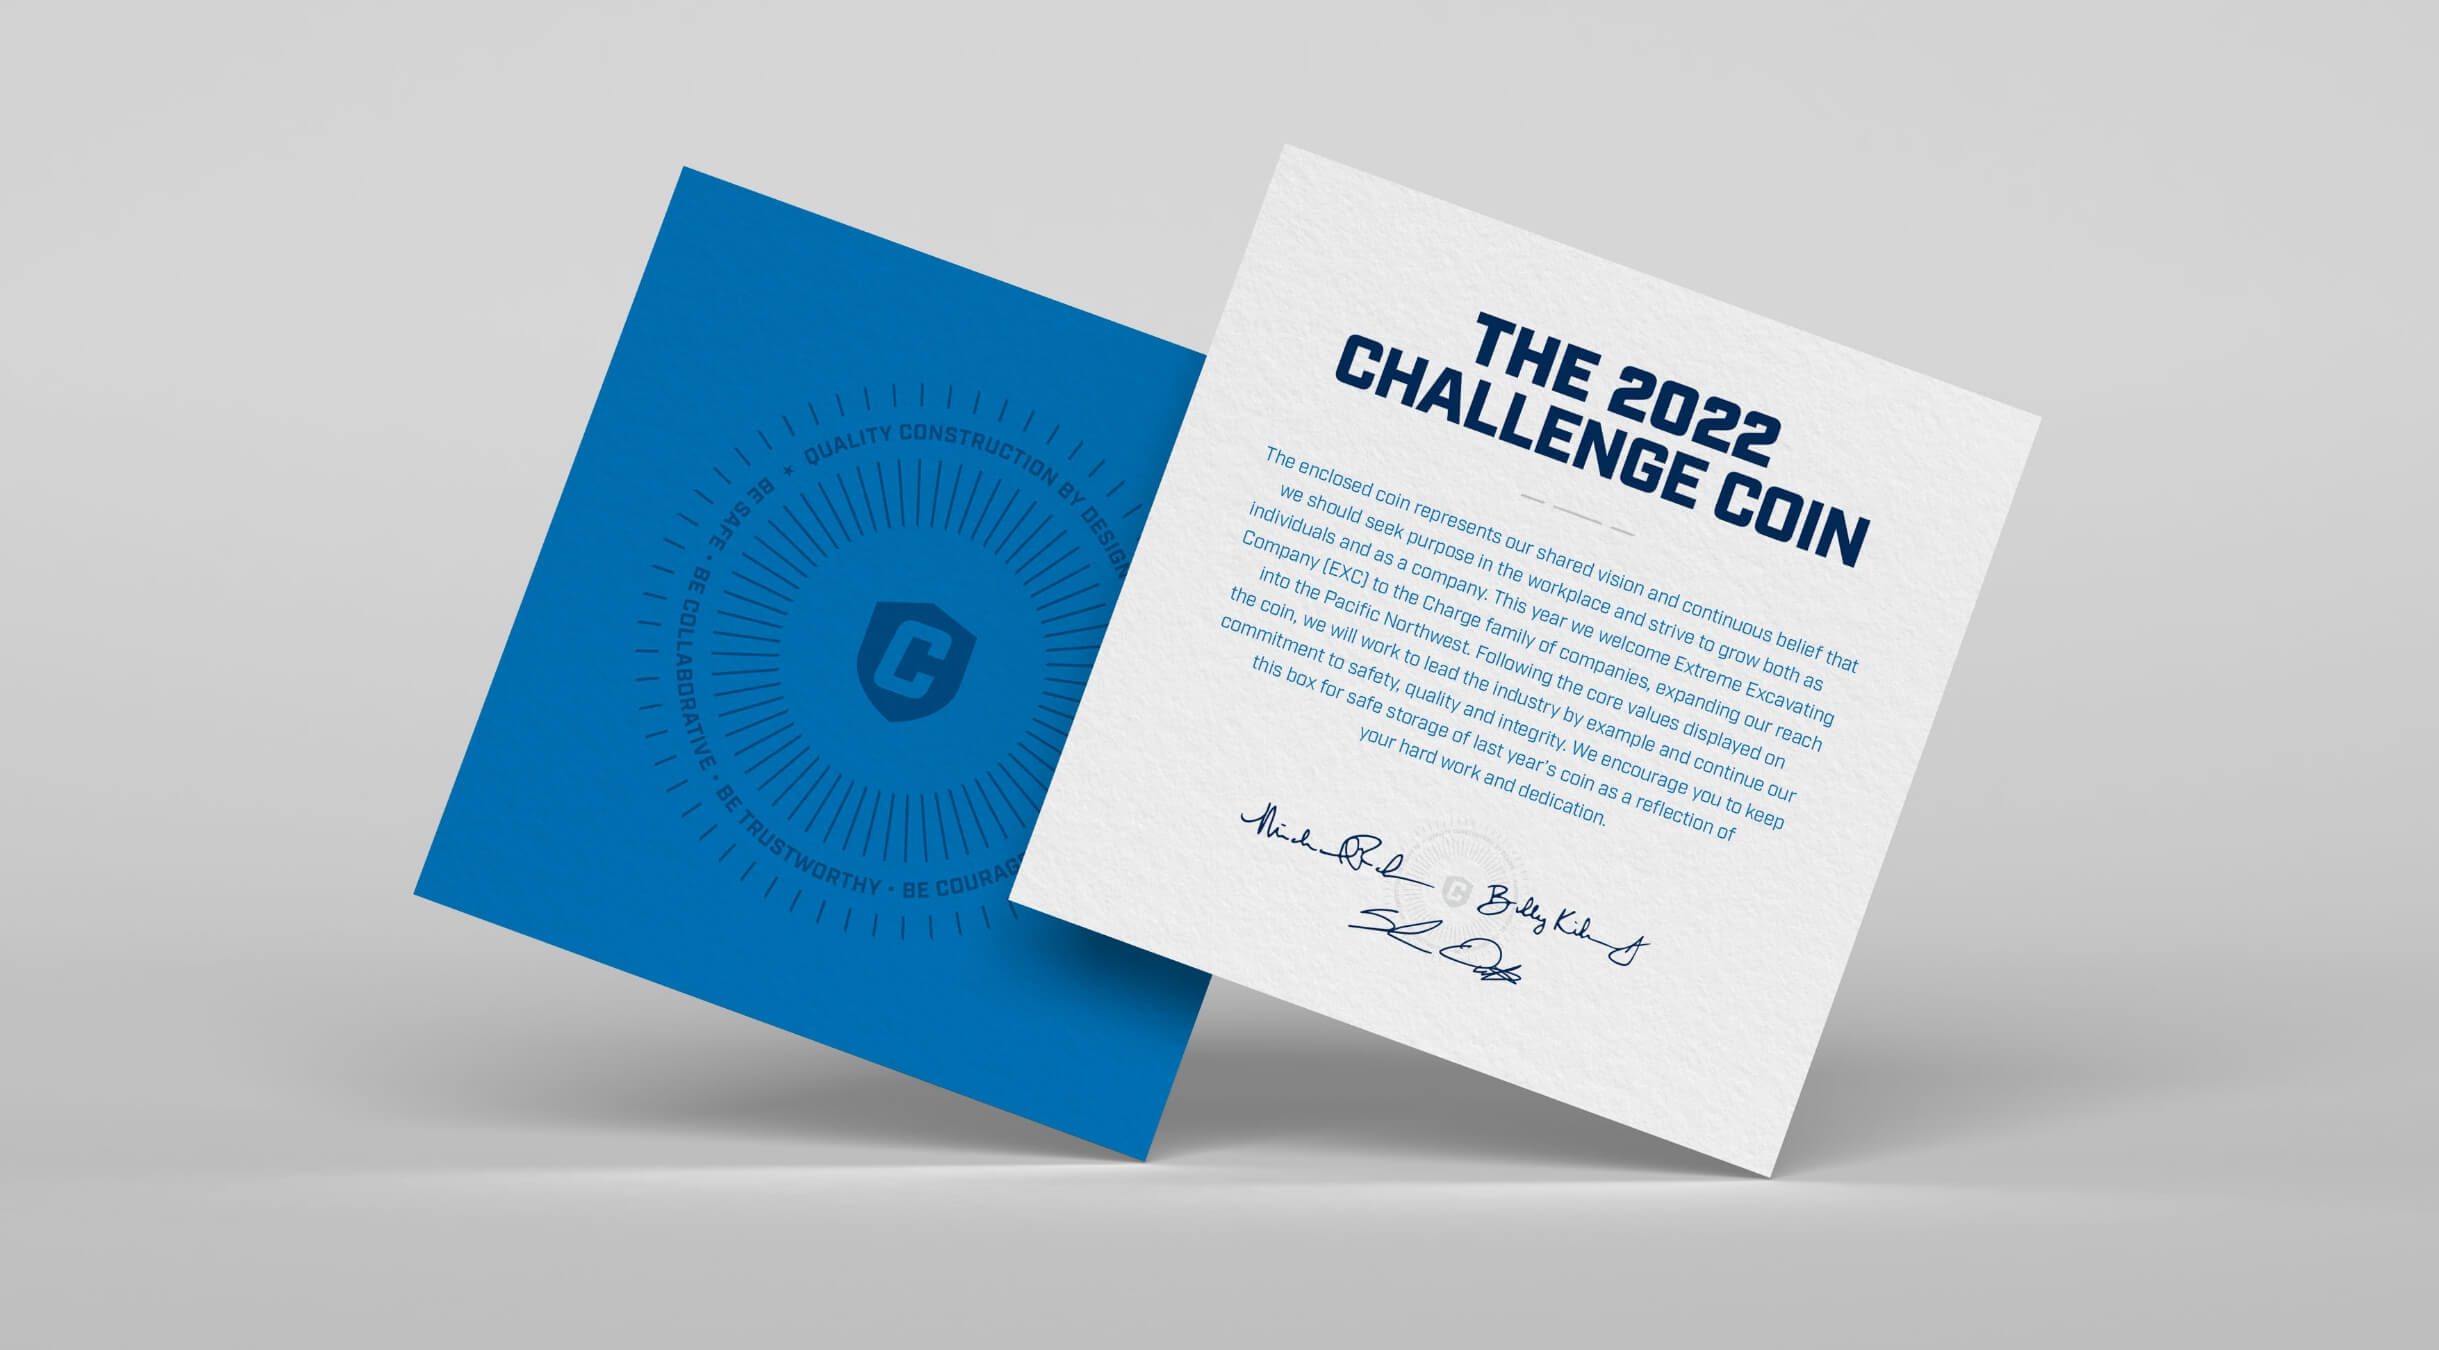 Charge coin card